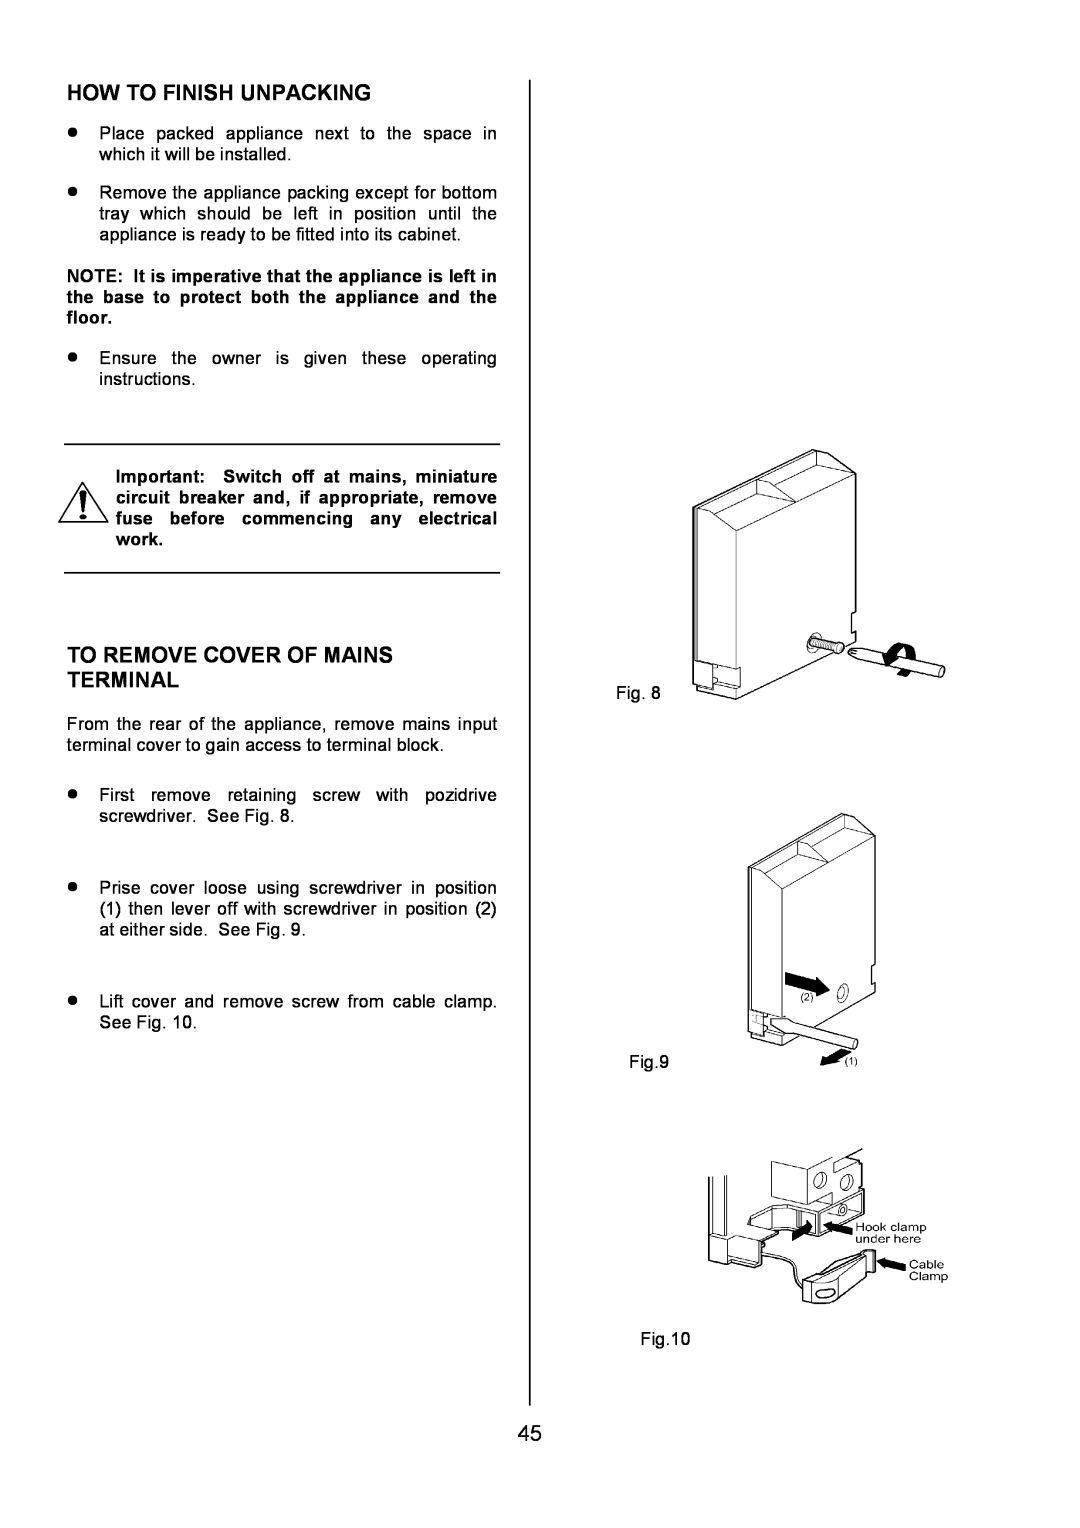 Electrolux U7101-4 operating instructions How To Finish Unpacking, To Remove Cover Of Mains Terminal 